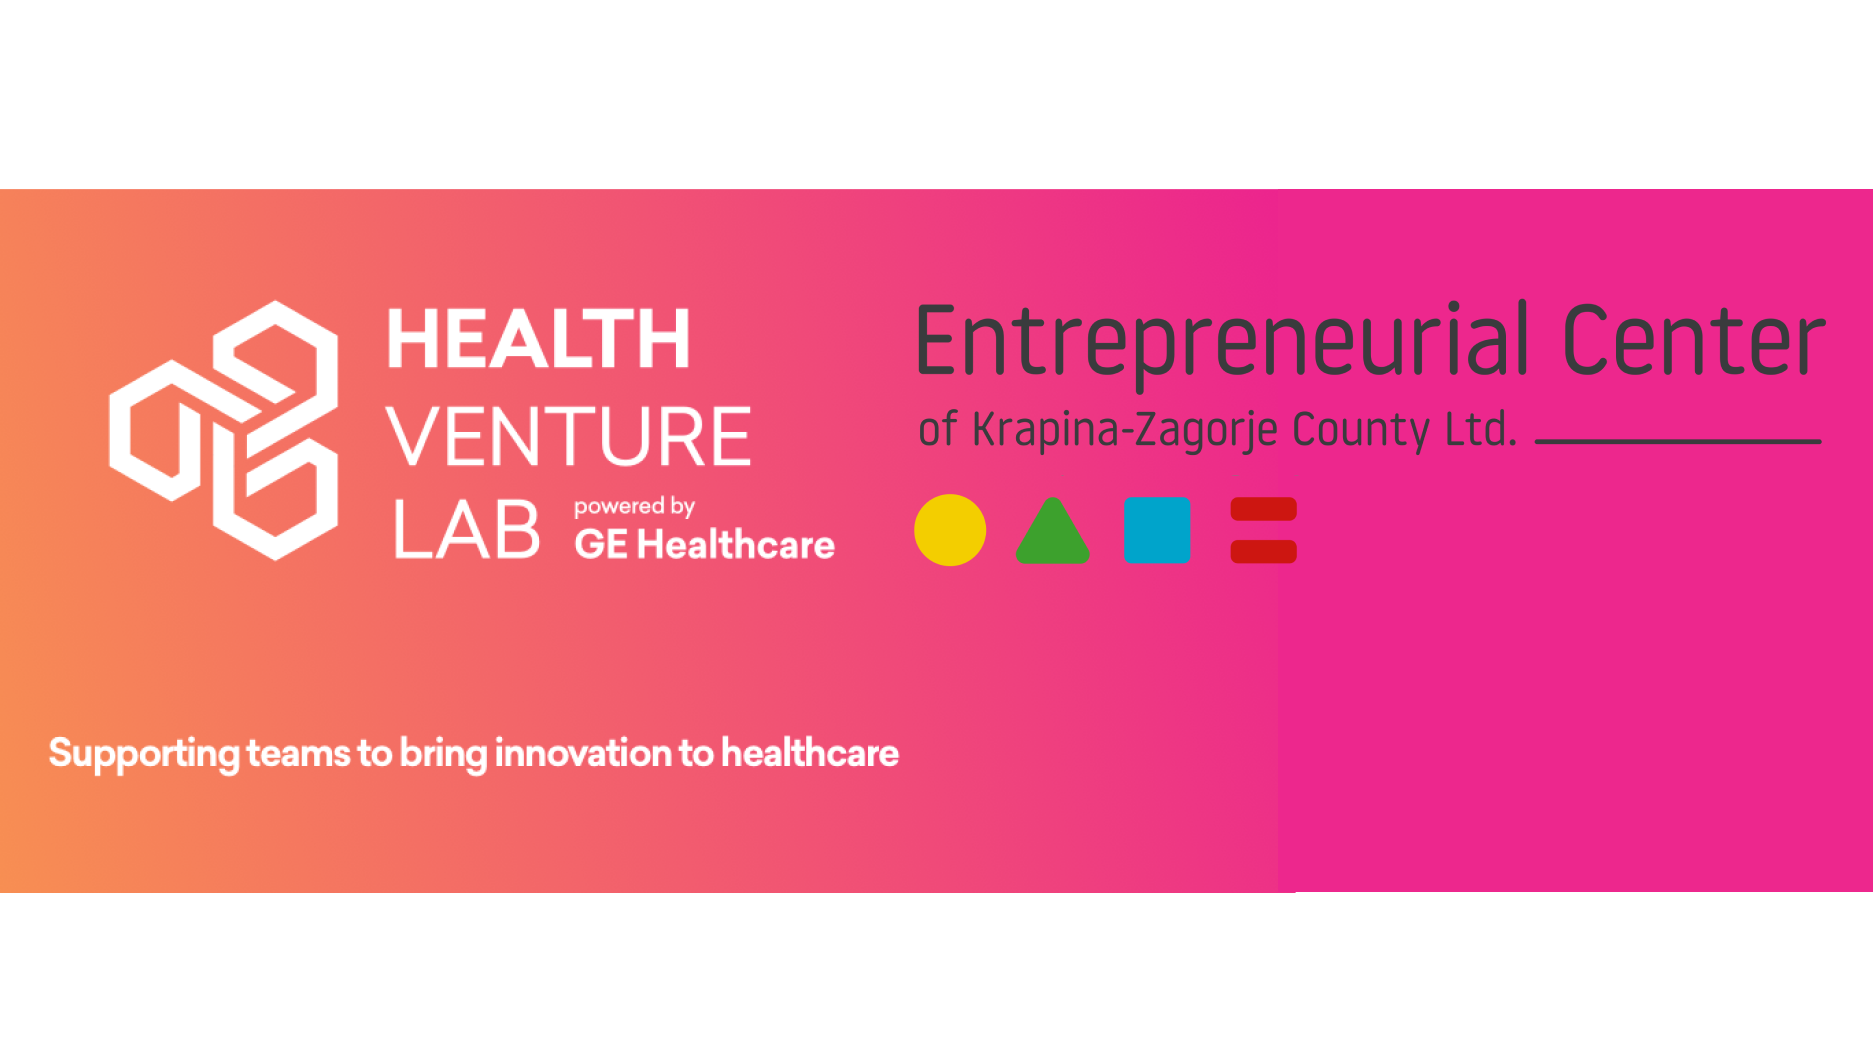 Health Venture Lab and the Entrepreneurship Center of Krapina-Zagorje have formed a new partnership to support the C.A.P.E.